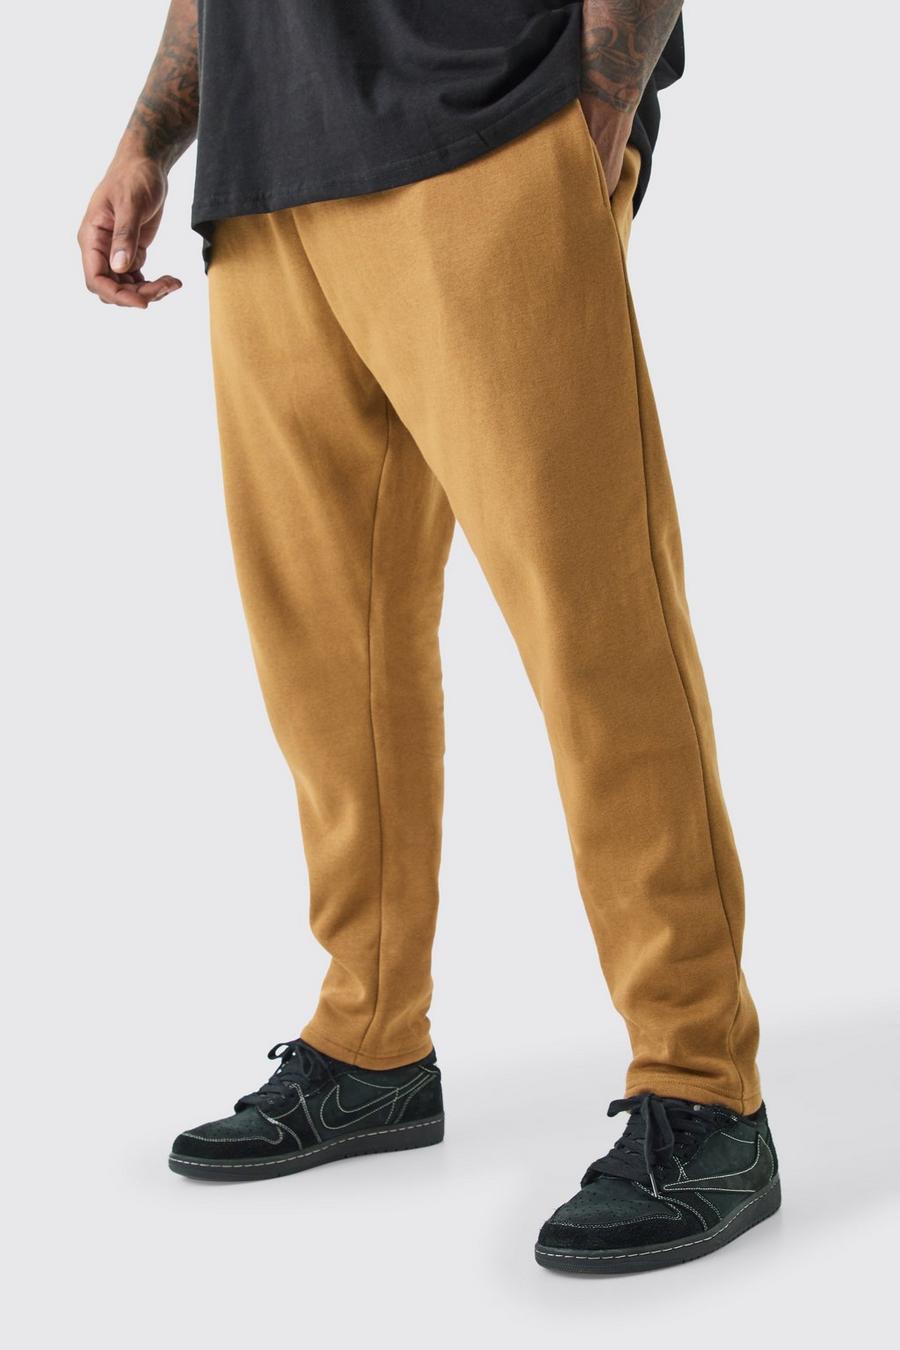 Tobacco Plus Tapered Basic Jogger